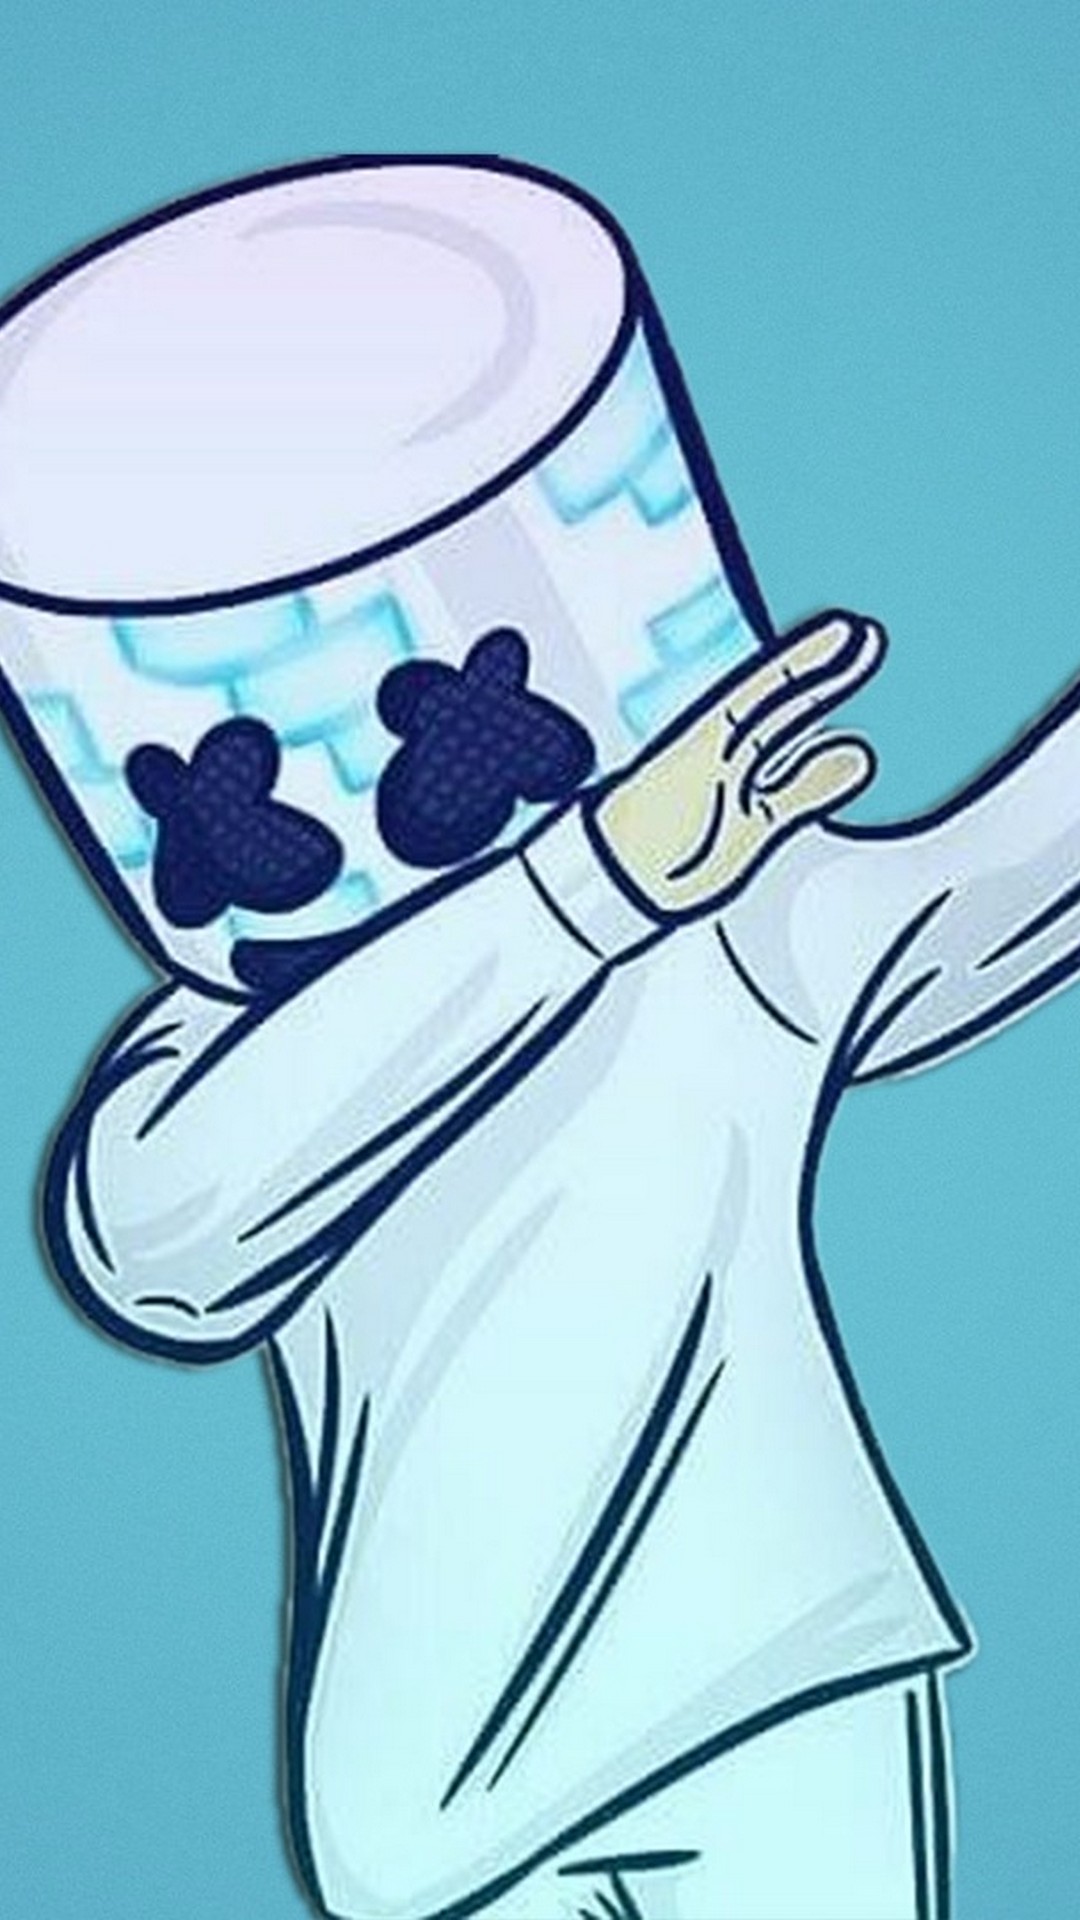 Marshmello iPhone X Wallpaper HD with high-resolution x pixel. Download all Mobile Wallpapers and Use them as wallpapers for your iPhone, Tablet, iPad, Android and other mobile devices